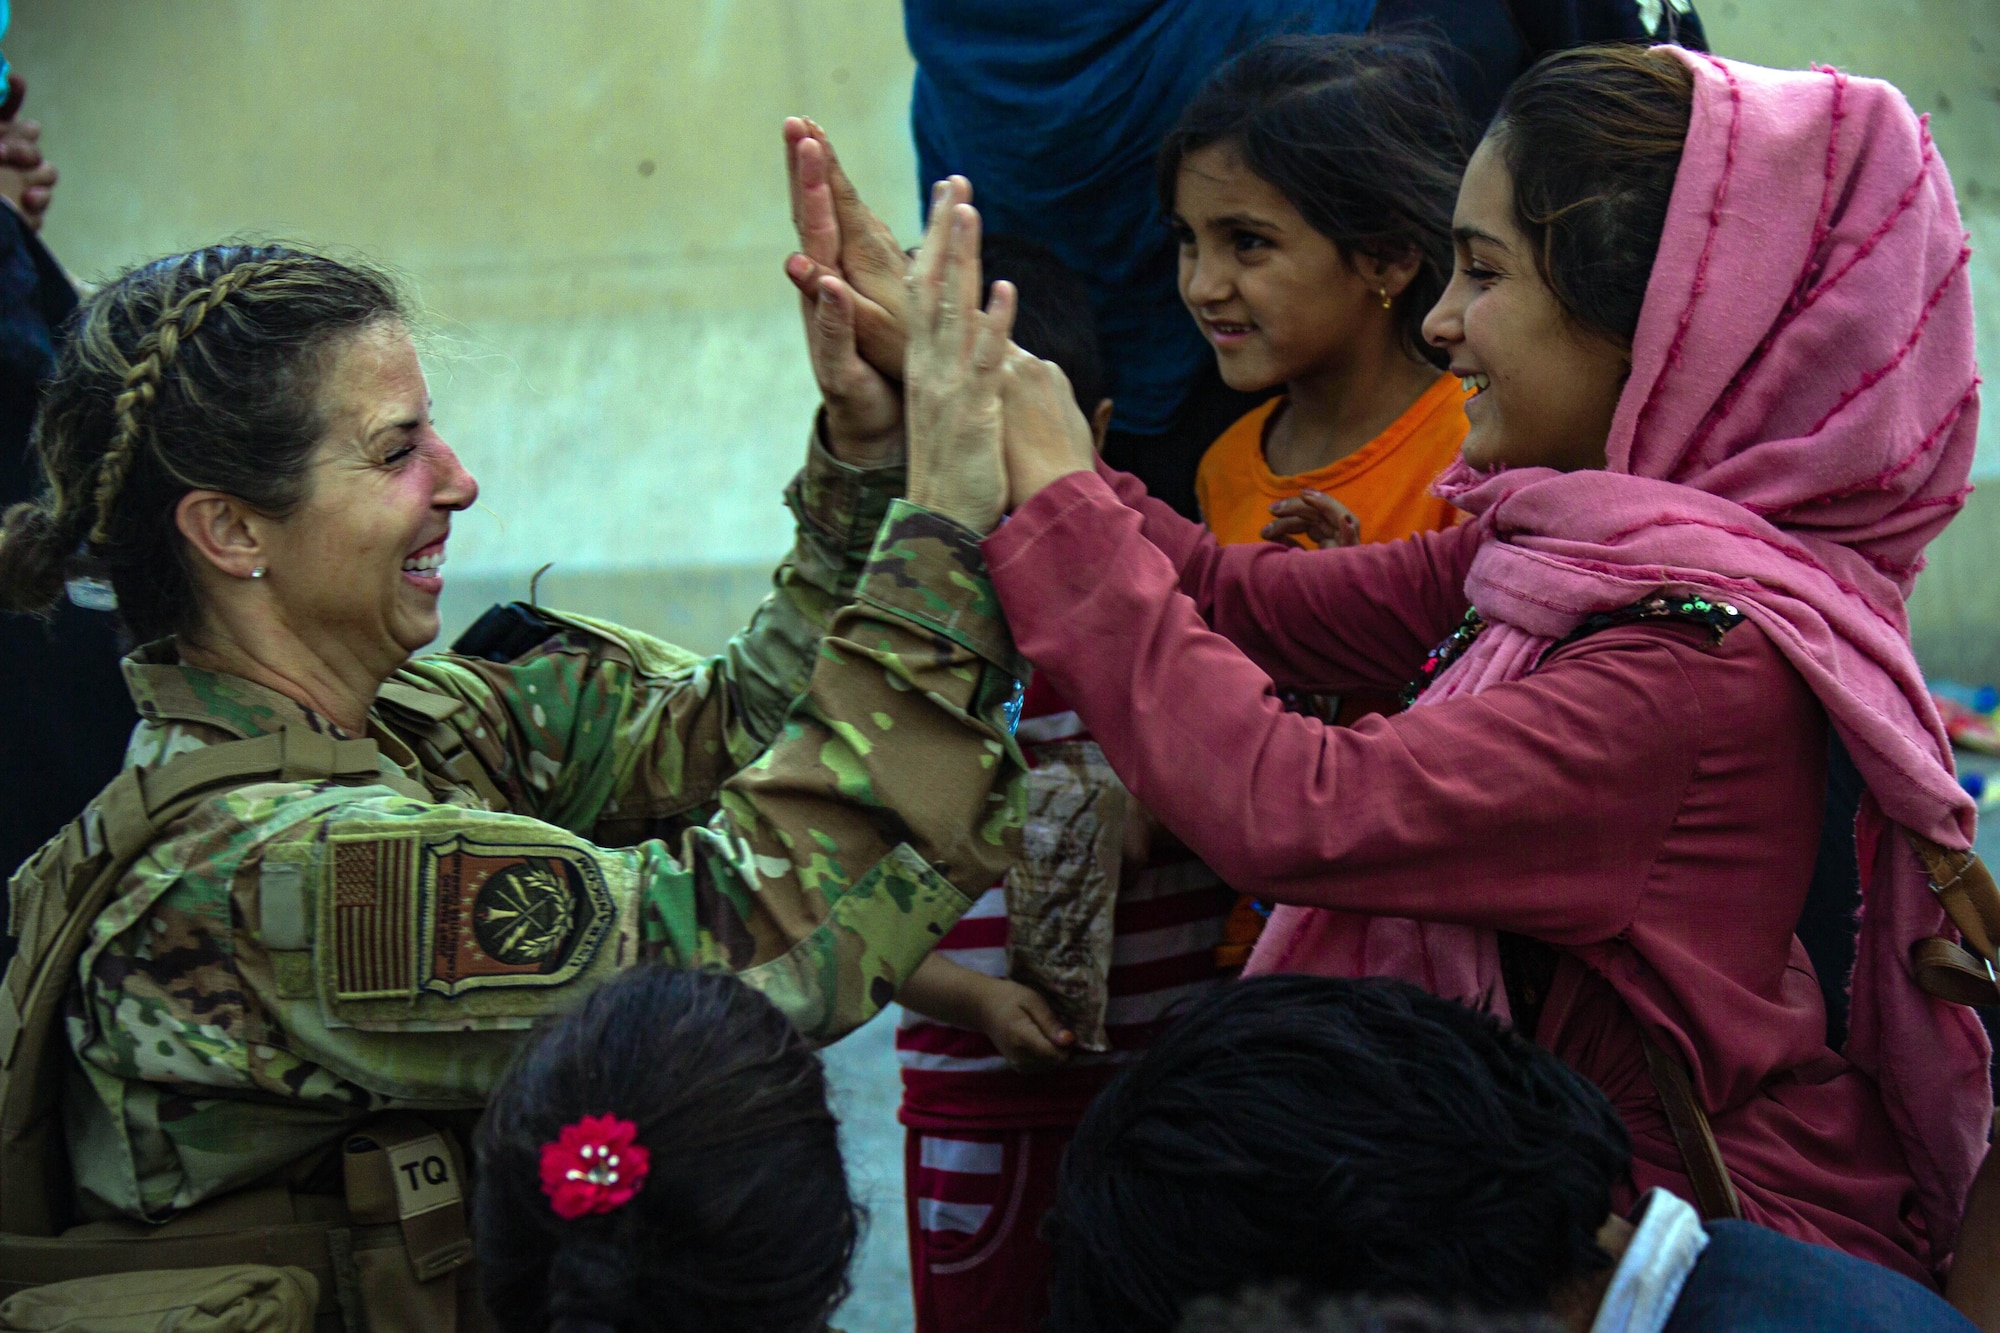 A U.S. Airman with Joint Task Force-Crisis Response high-fives a child after helping reunite their family